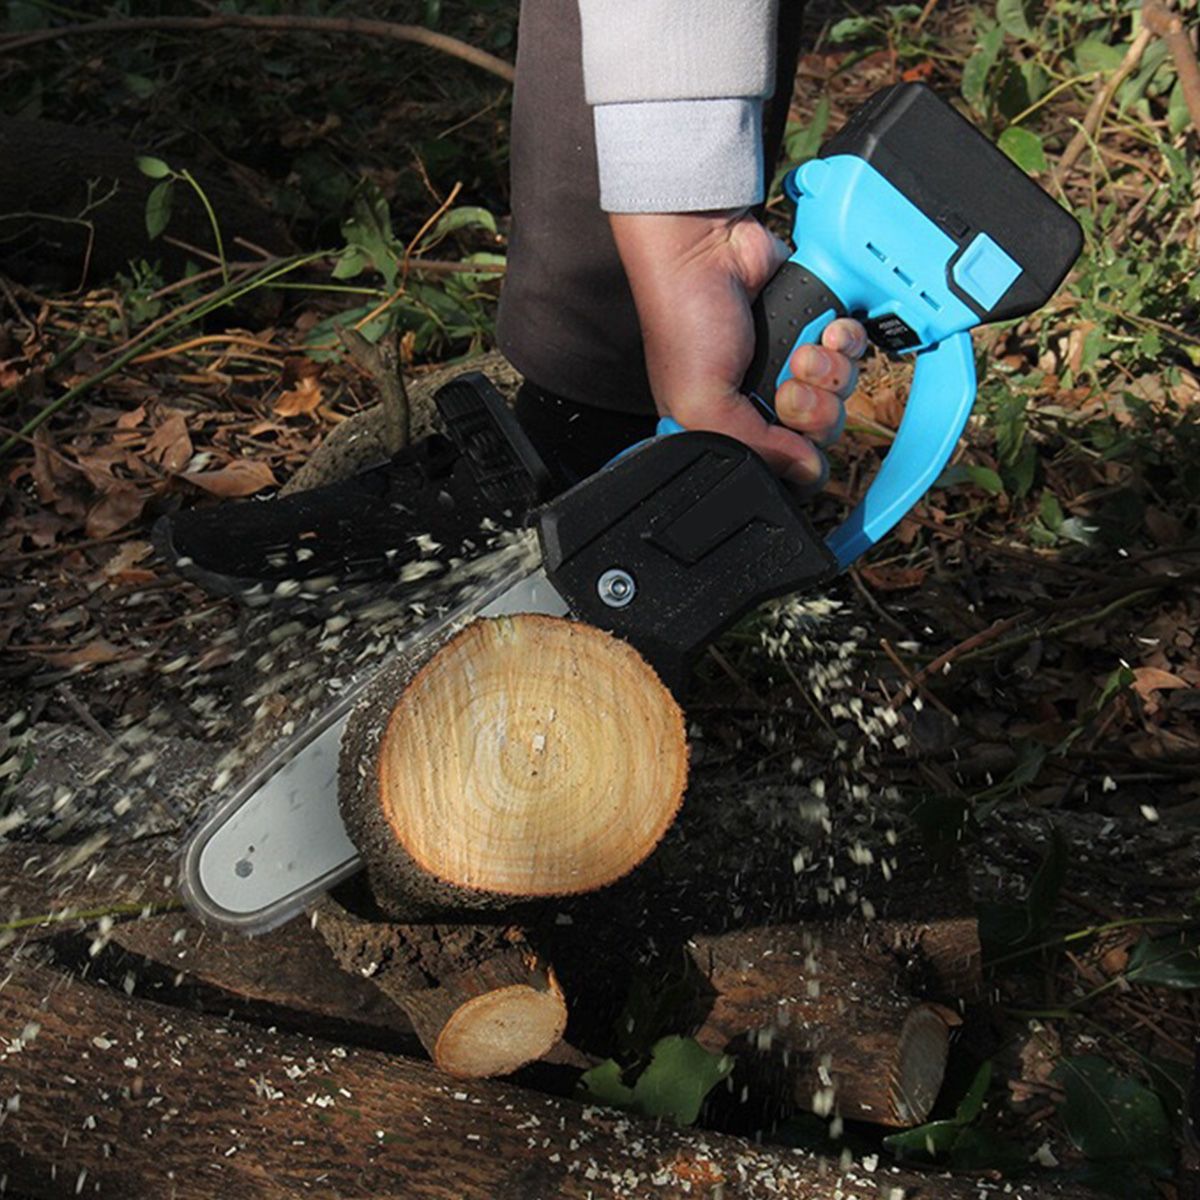 100-240V-21V-9-Mini-Portable-One-Hand-Saw-Woodworking-Electric-Chain-Saw-Wood-Cutter-1708583